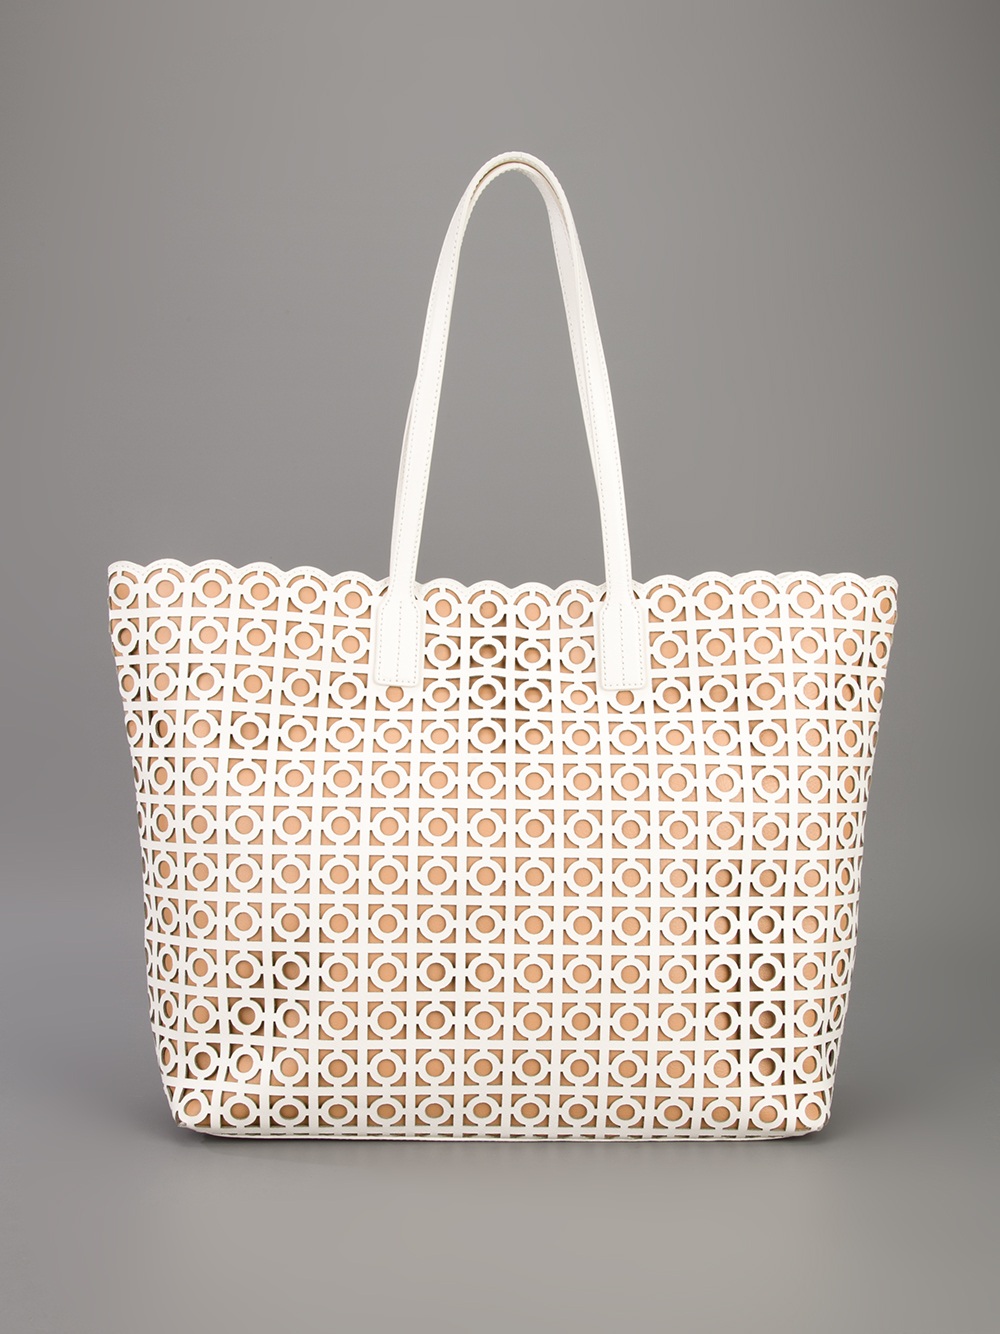 Tory Burch White Bag | The Art of Mike Mignola